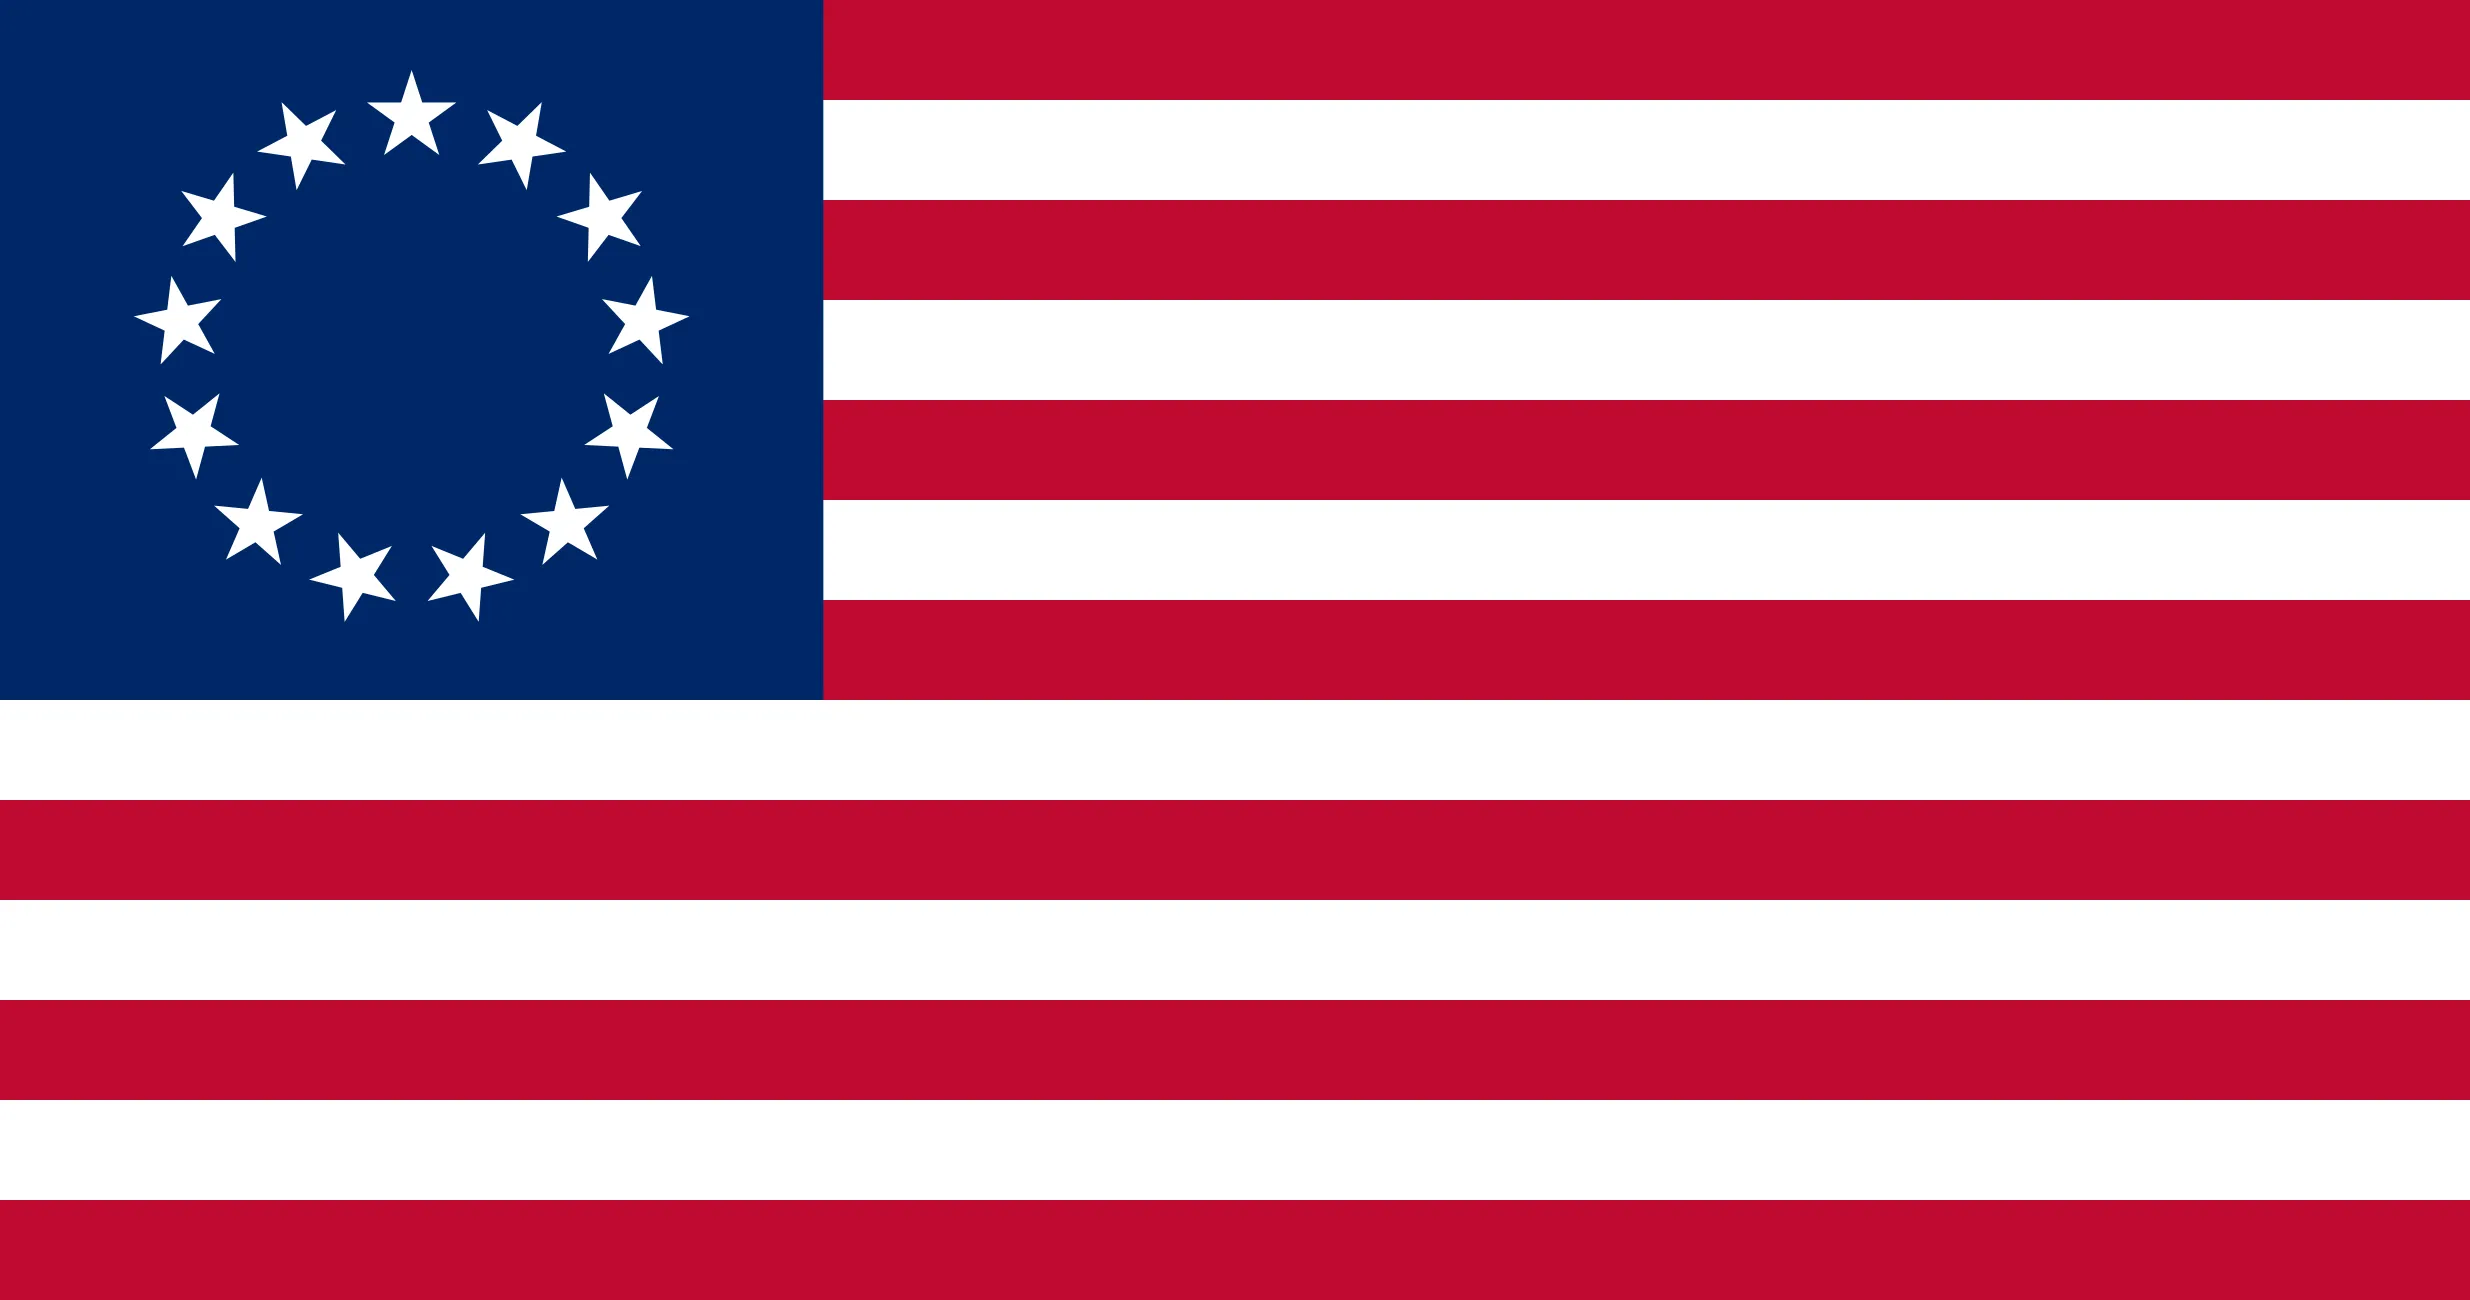 Version of the "Betsy Ross" design of the first flag of the United States